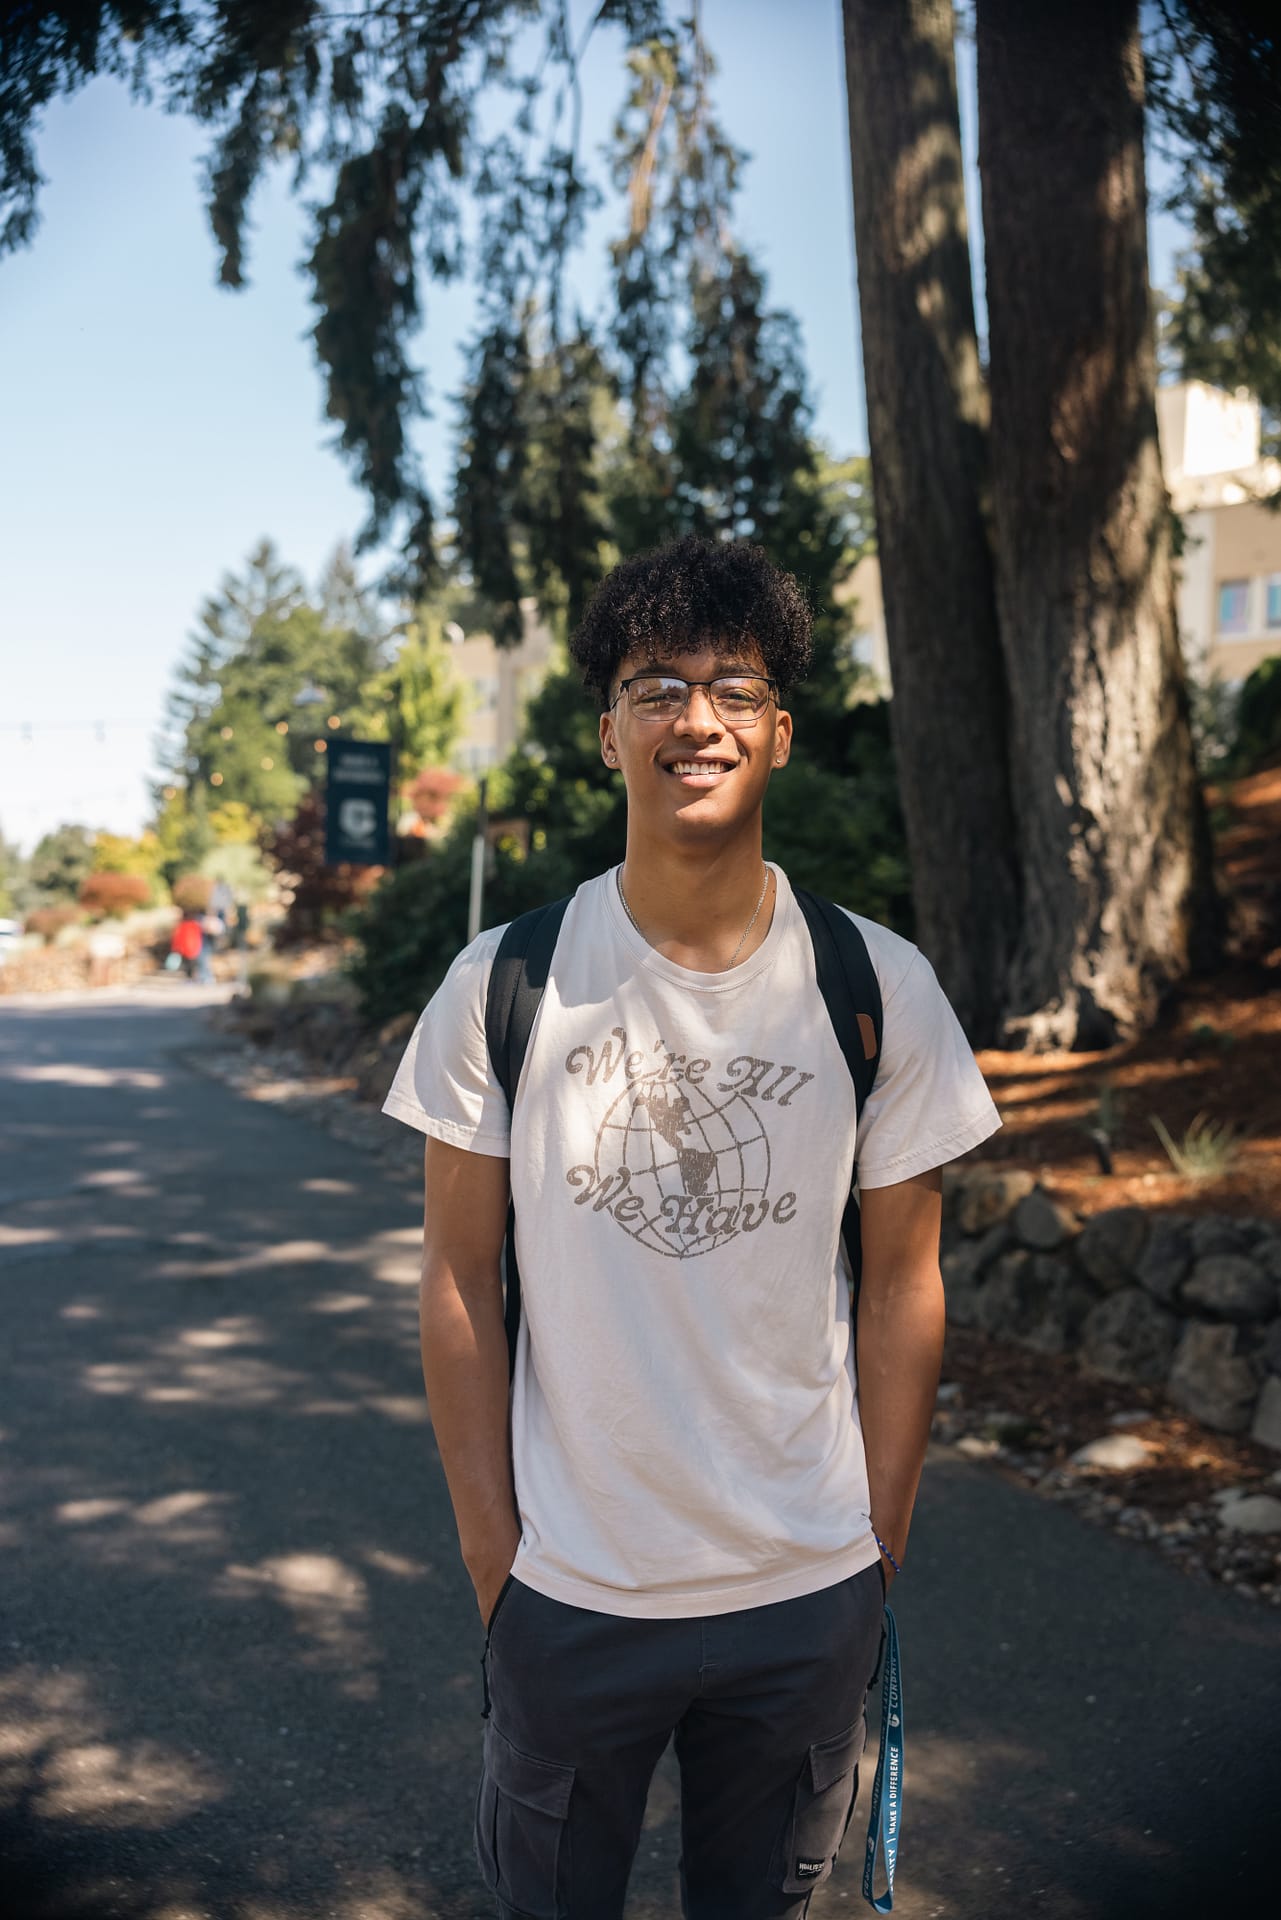 FINDING AUTHENTIC COMMUNITY ON CORBAN’S CAMPUS: CHRISTOPHER NOBLES